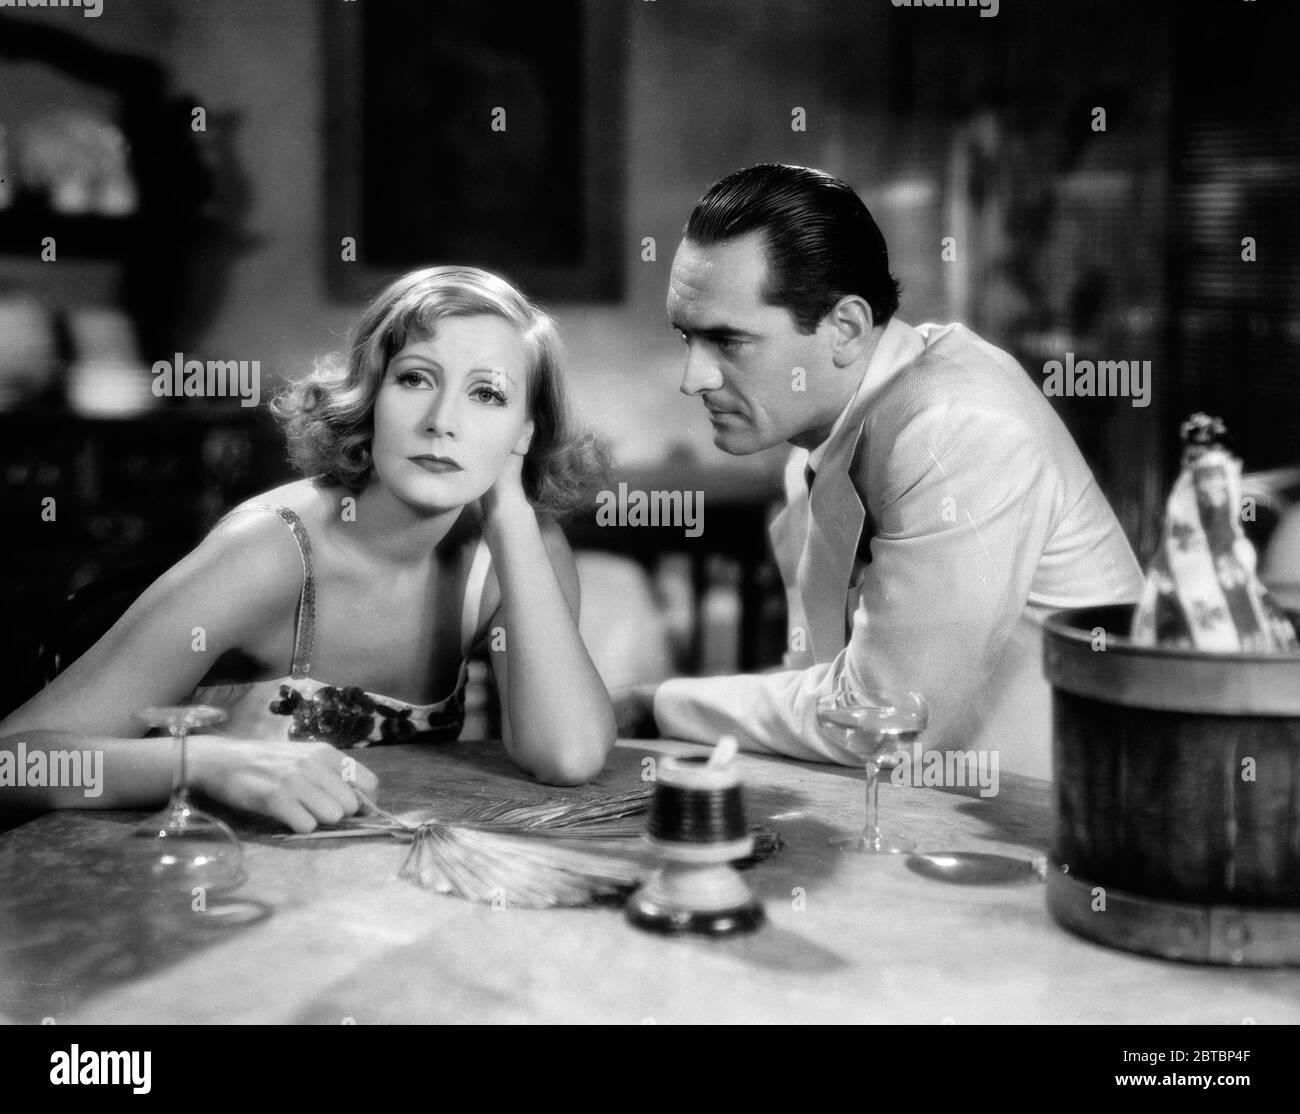 Swedish-born actress Greta Garbo (Retrospective), (born on September 18, 1905, died on April 15 ,1990 at aged 84) and John Miljan (1892 - 1960) as Burlingham in a scene from 'Susan Lenox (Her Fall and Rise)' (aka 'The Rise of Helga'), directed by Robert Z Leonard (1931) MGM /  File Reference # 34000-042THA Stock Photo